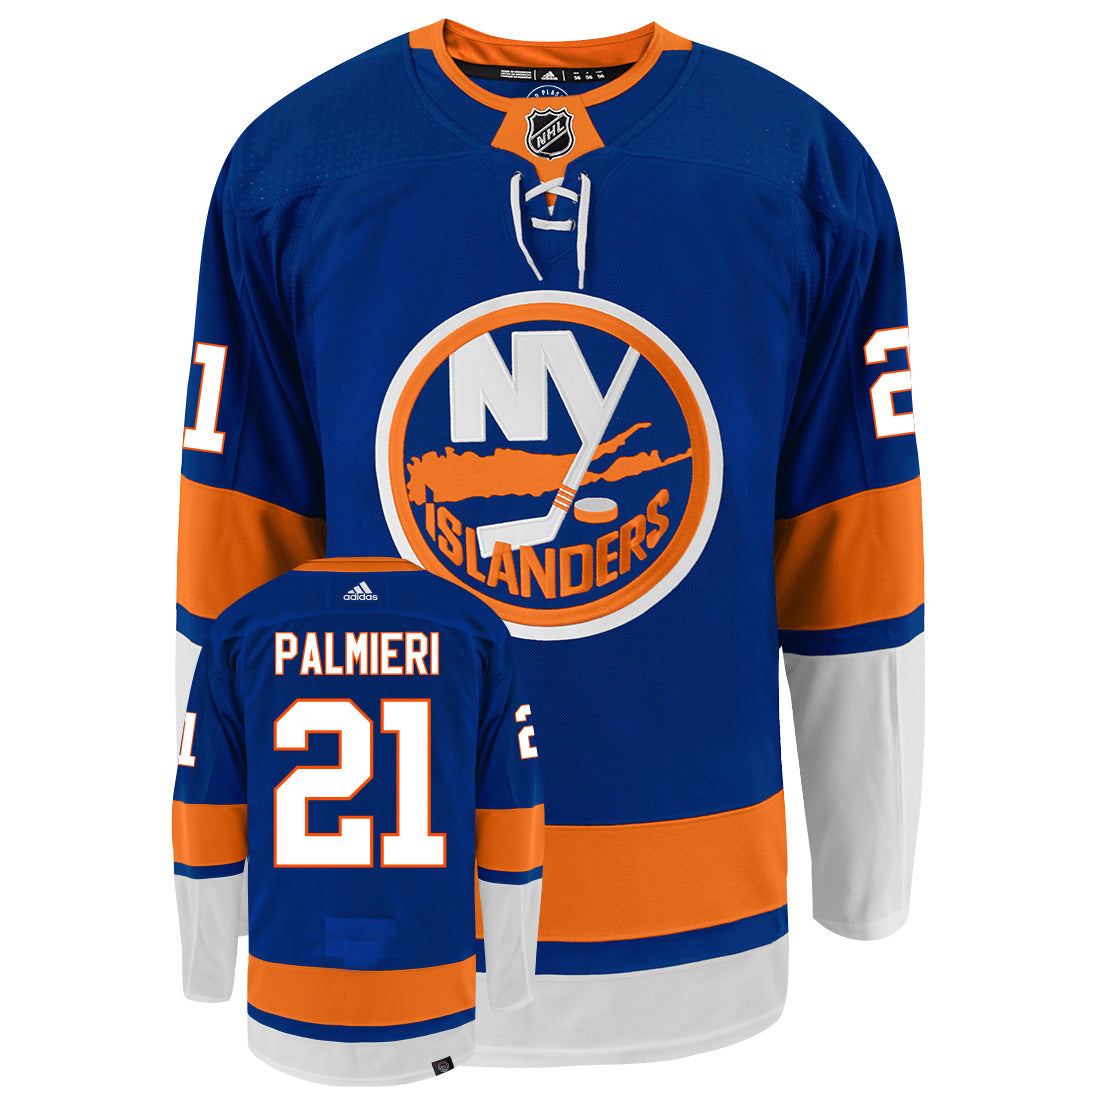 Kyle Palmieri New York Islanders Adidas Primegreen Authentic NHL Hockey Jersey - Front/Back View